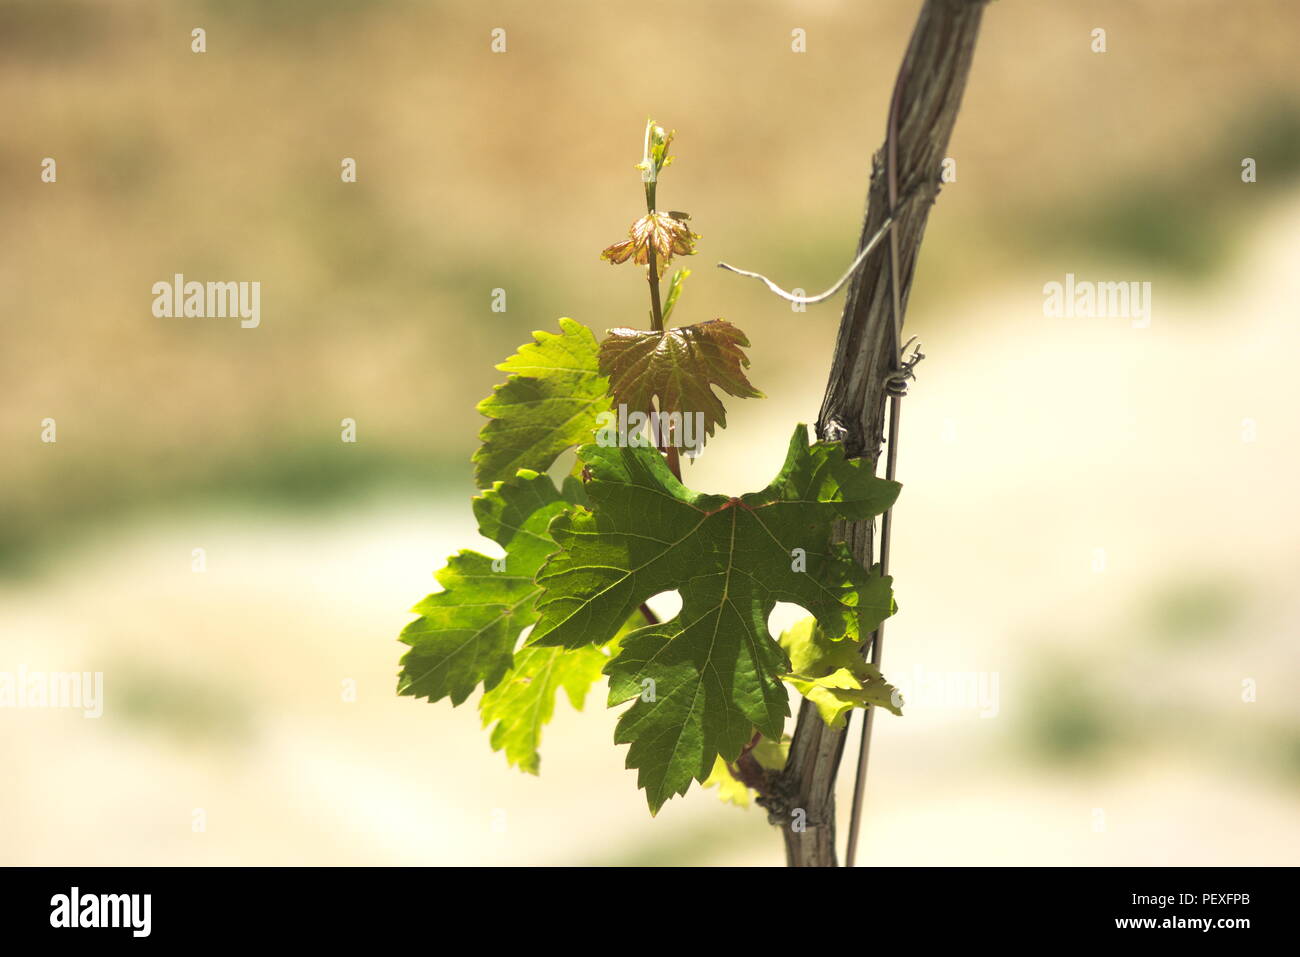 Greece, the island of Ios.  At the harbor a vine grows and is nourished by the summer sun Stock Photo